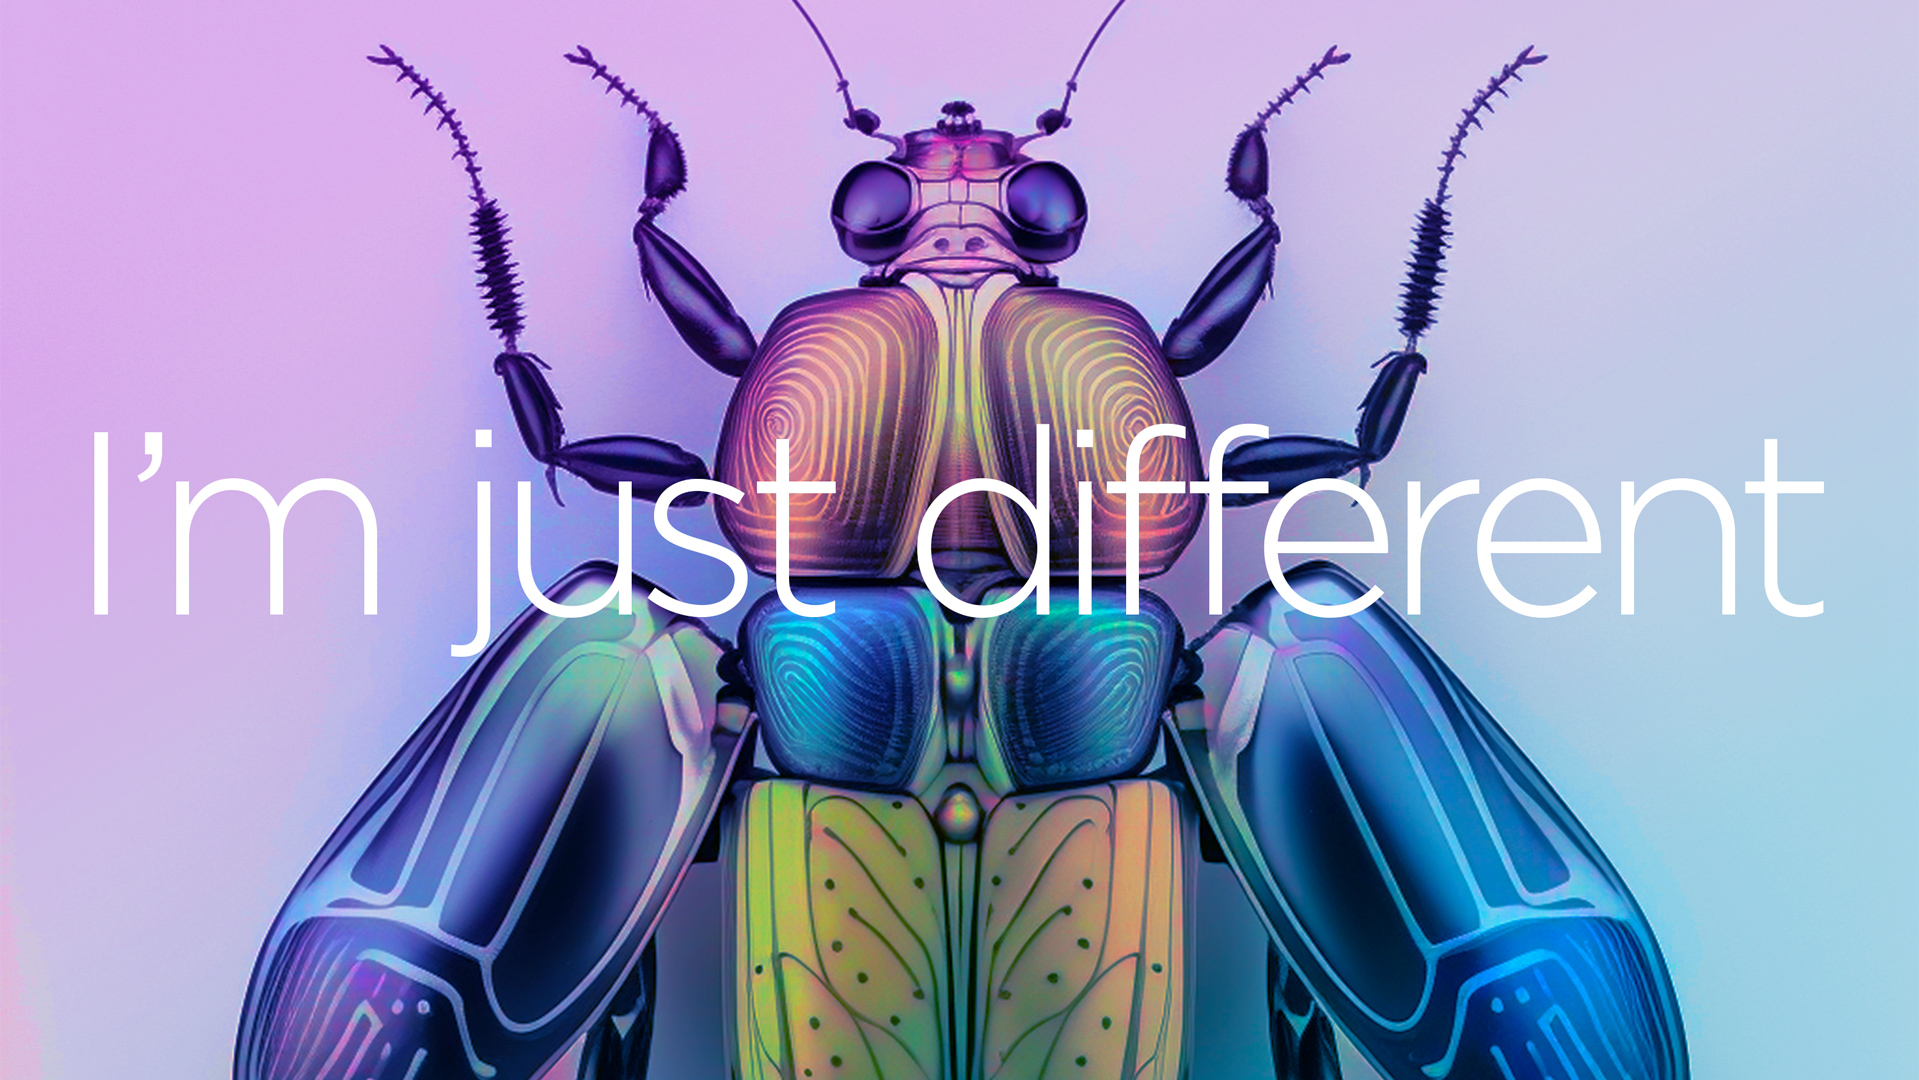 Cover artwork for "I'm just different" by Boris Rio